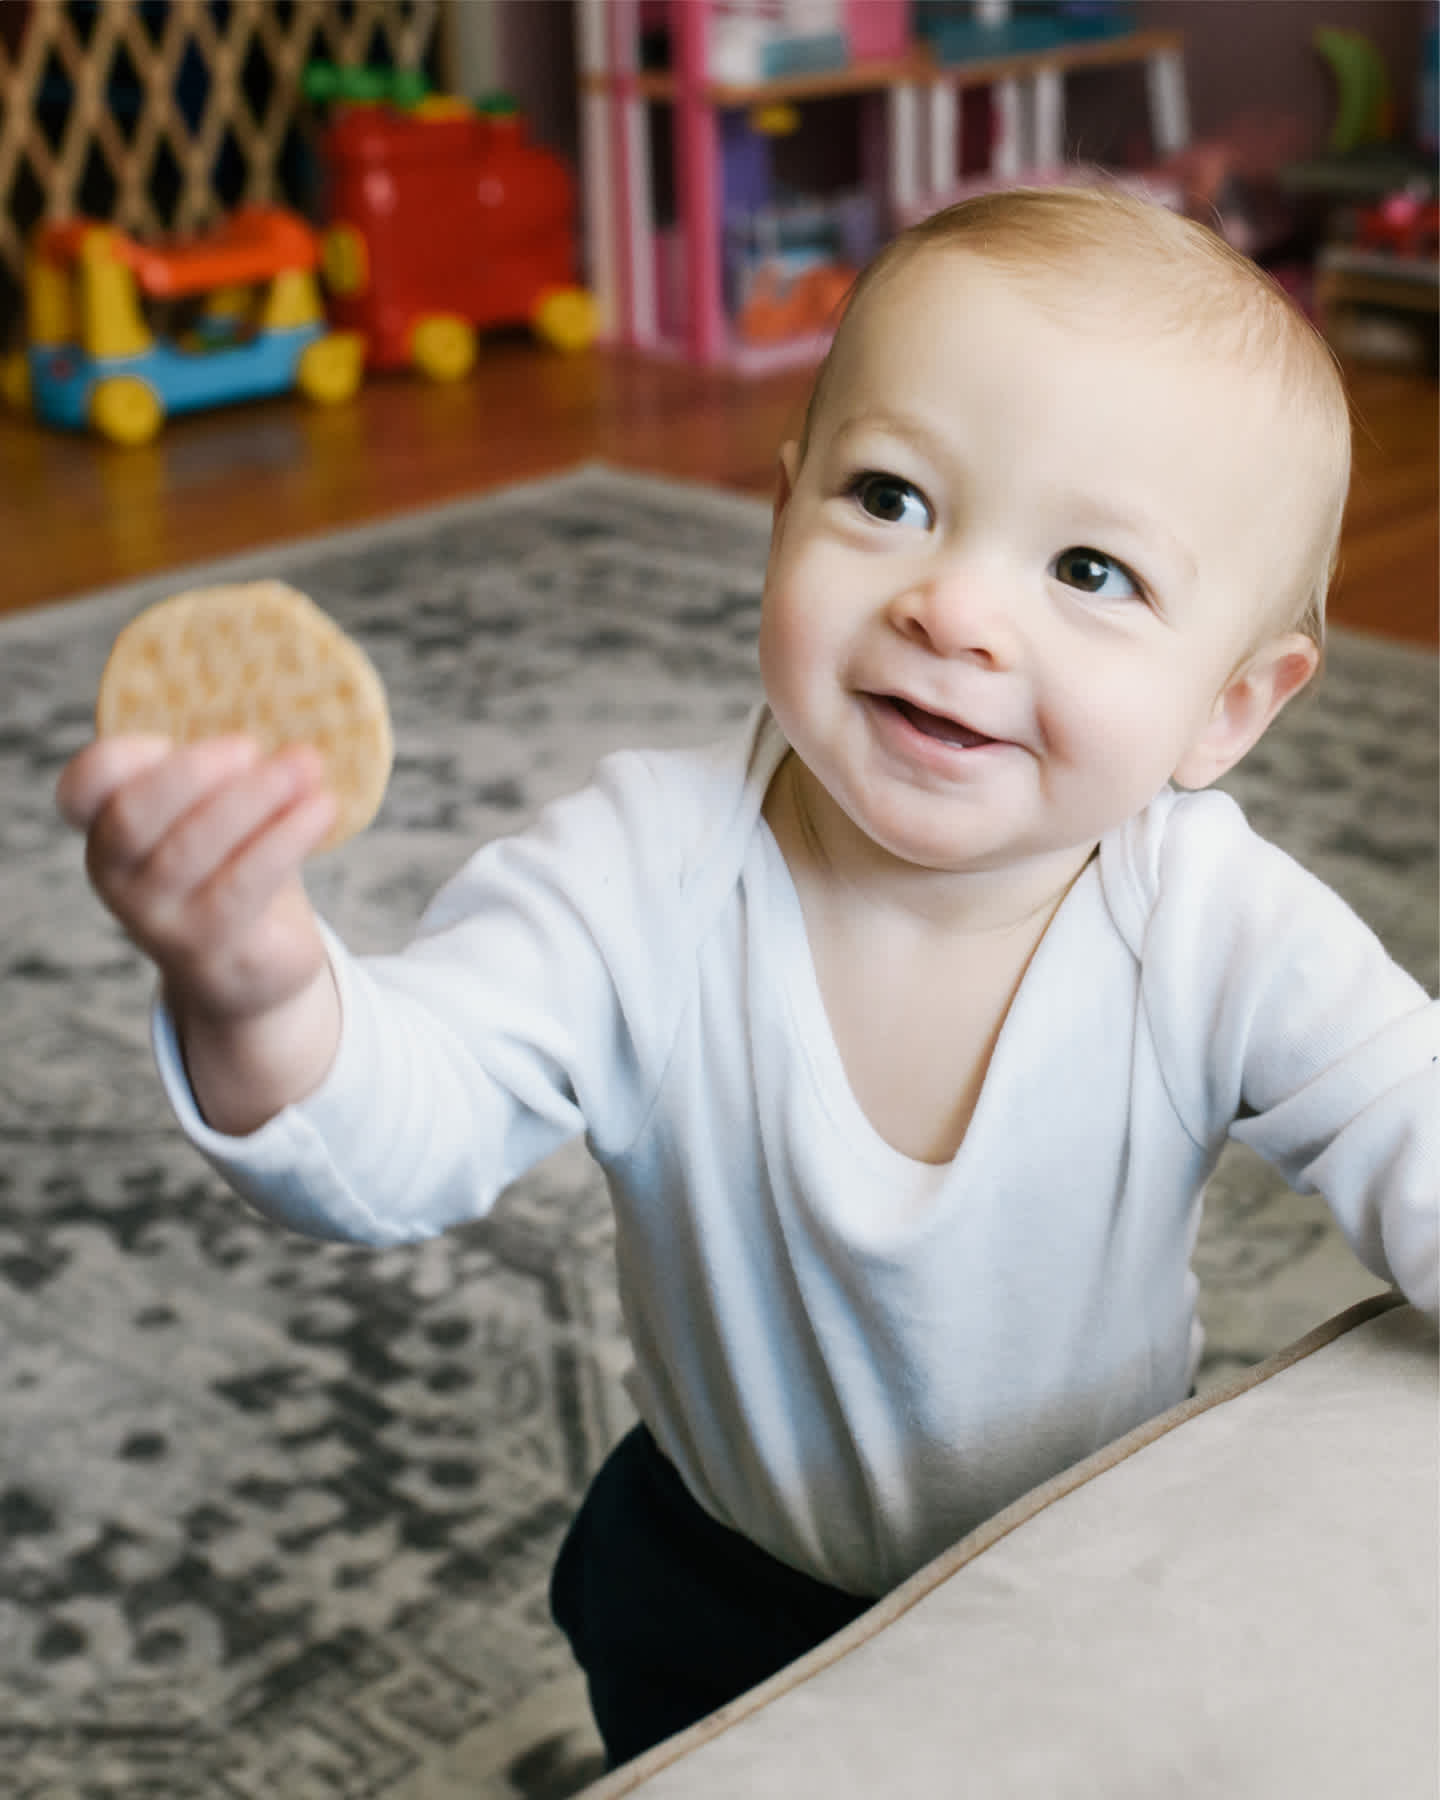 Baby standing and holding up cracker.